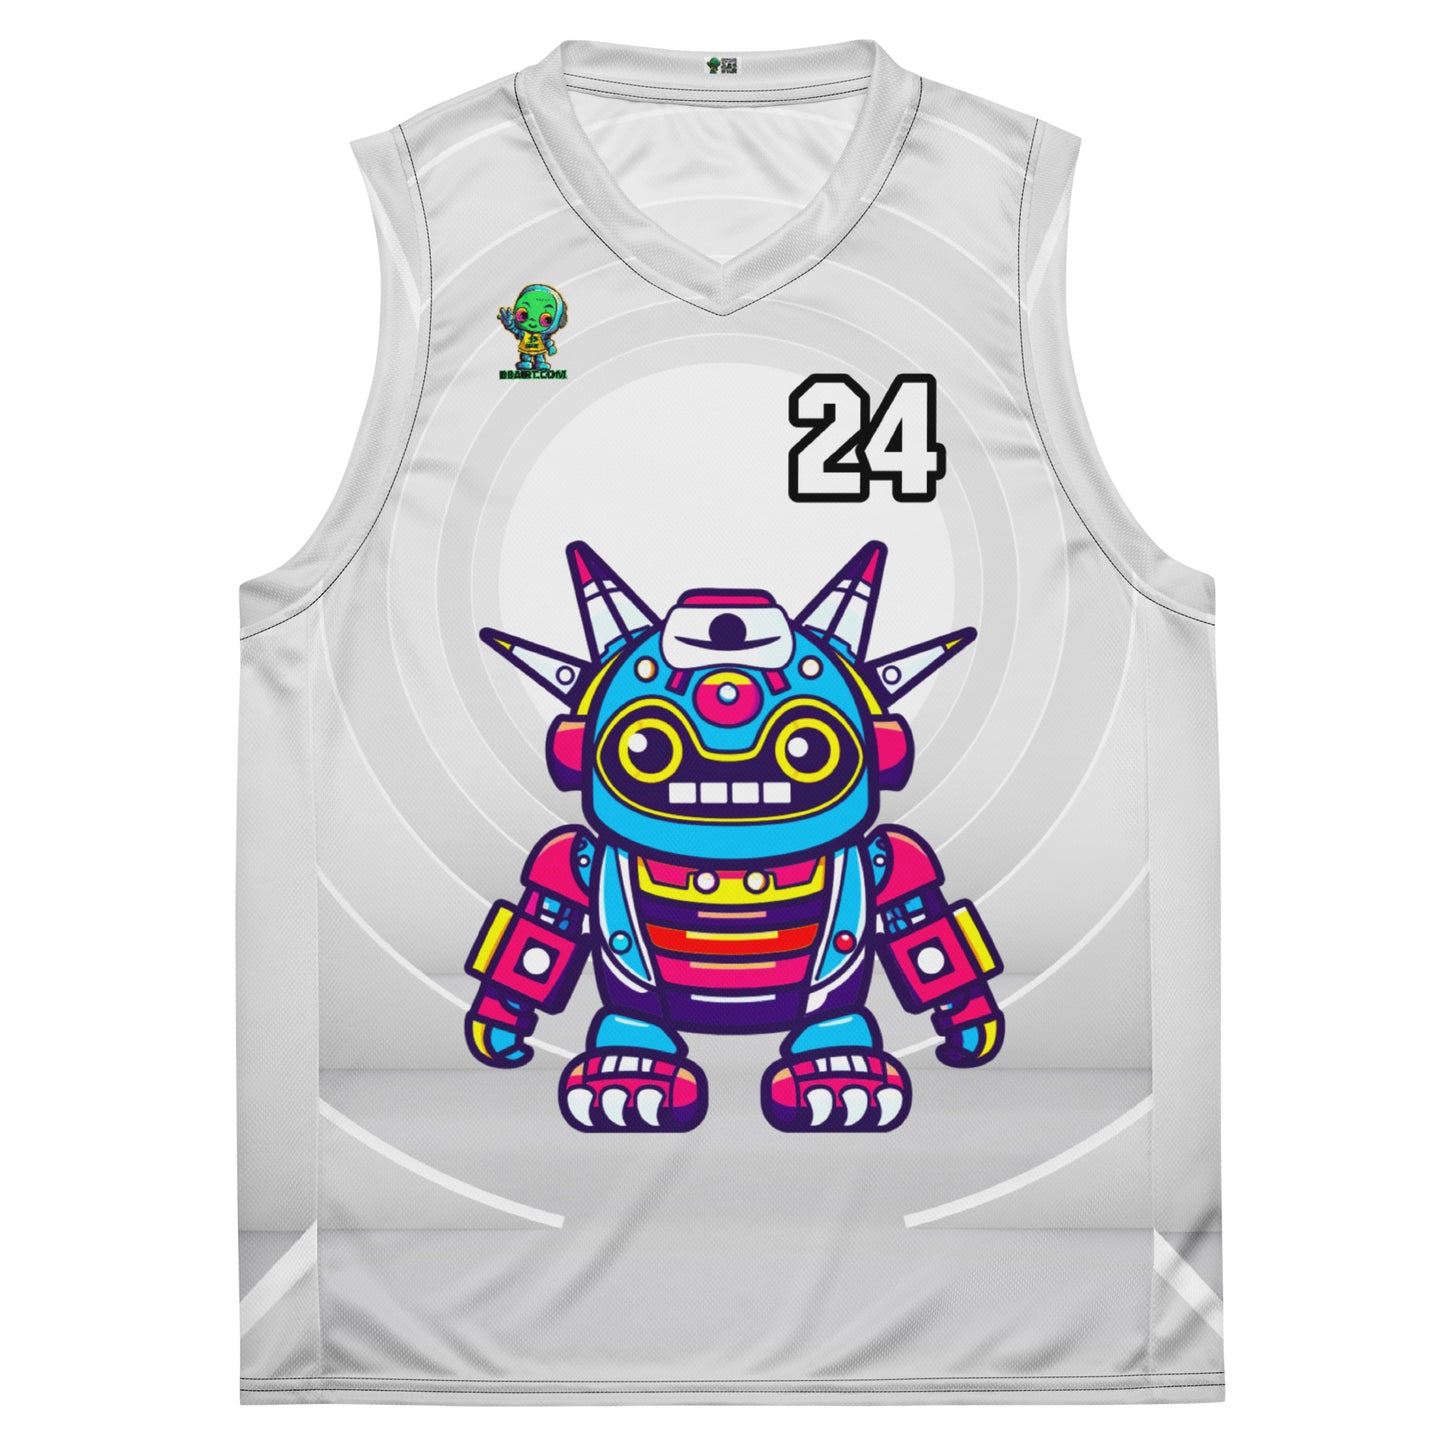 Techno Guardian - Recycled unisex basketball jersey - Ivory Vortex Colorway